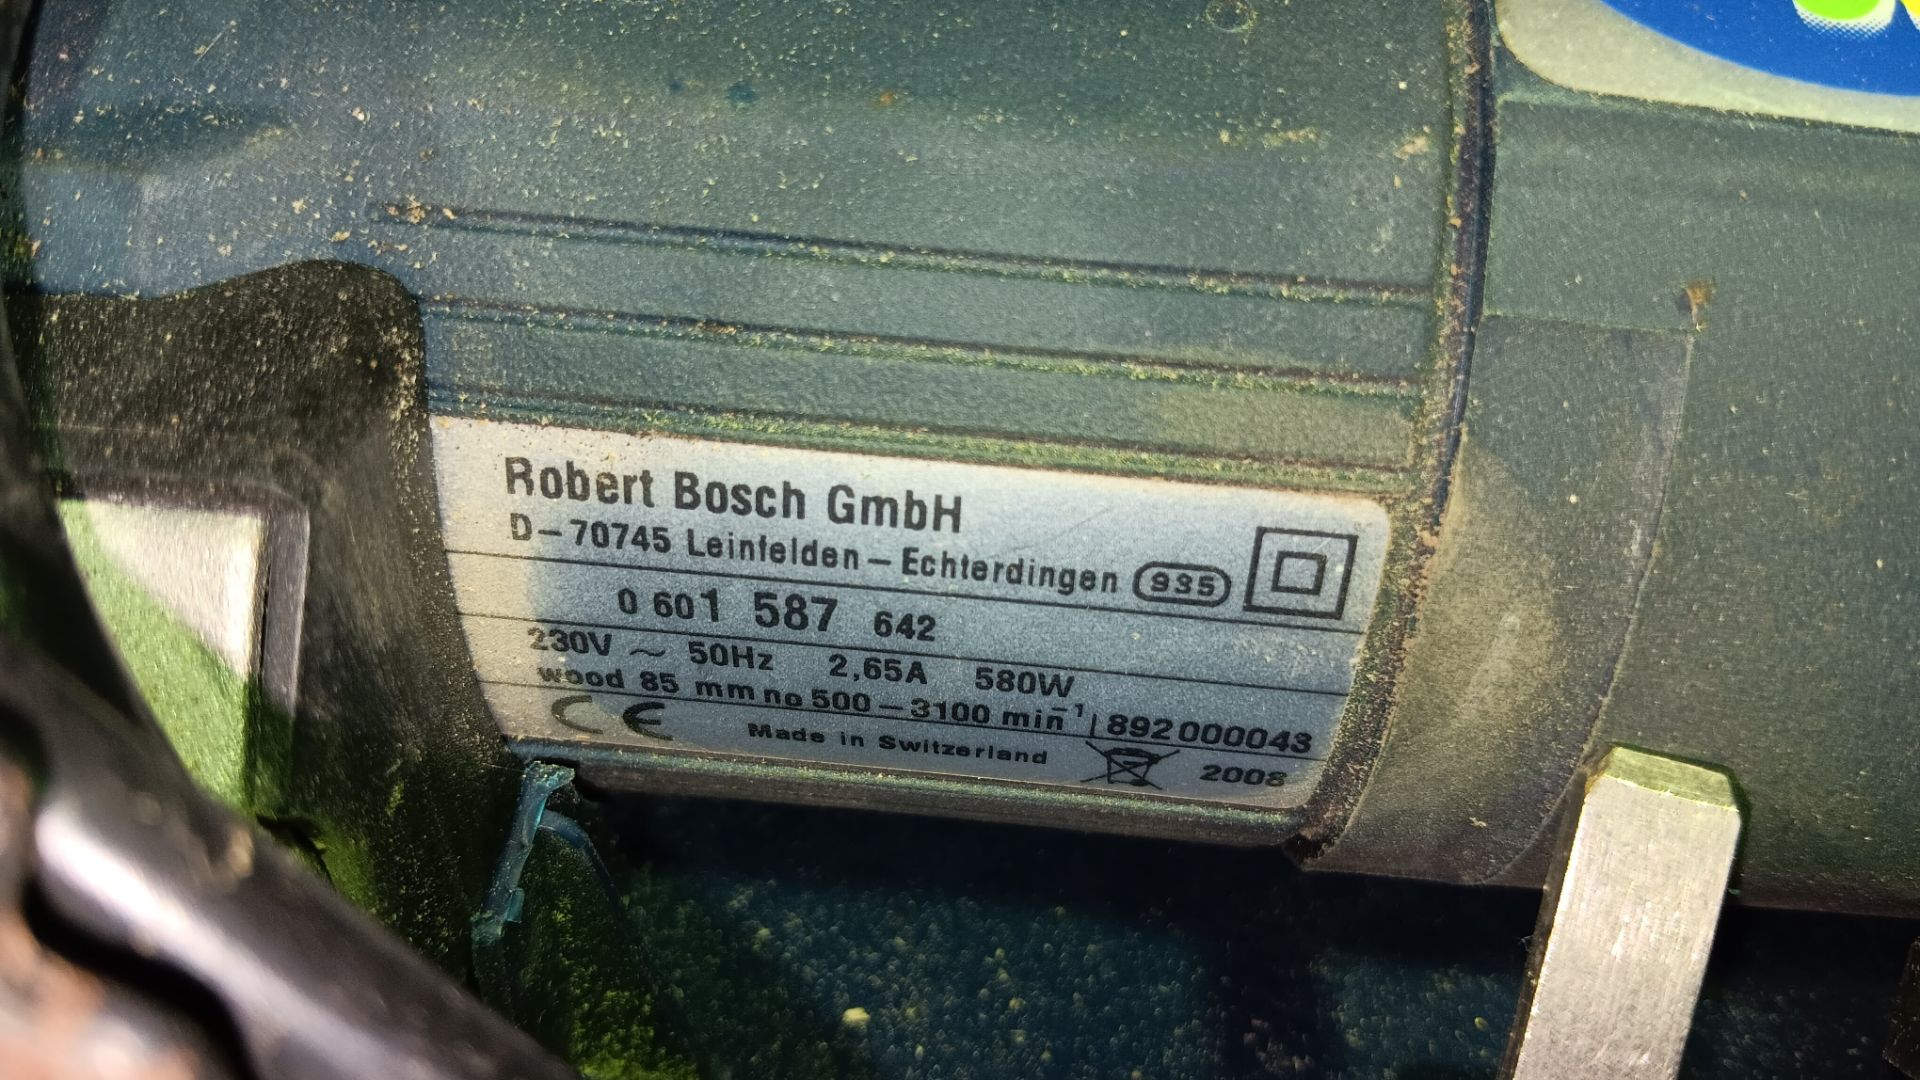 Bosch GST2000 orbital jigsaw with case, 240v, serial number 892000043 (2008) - Image 3 of 3